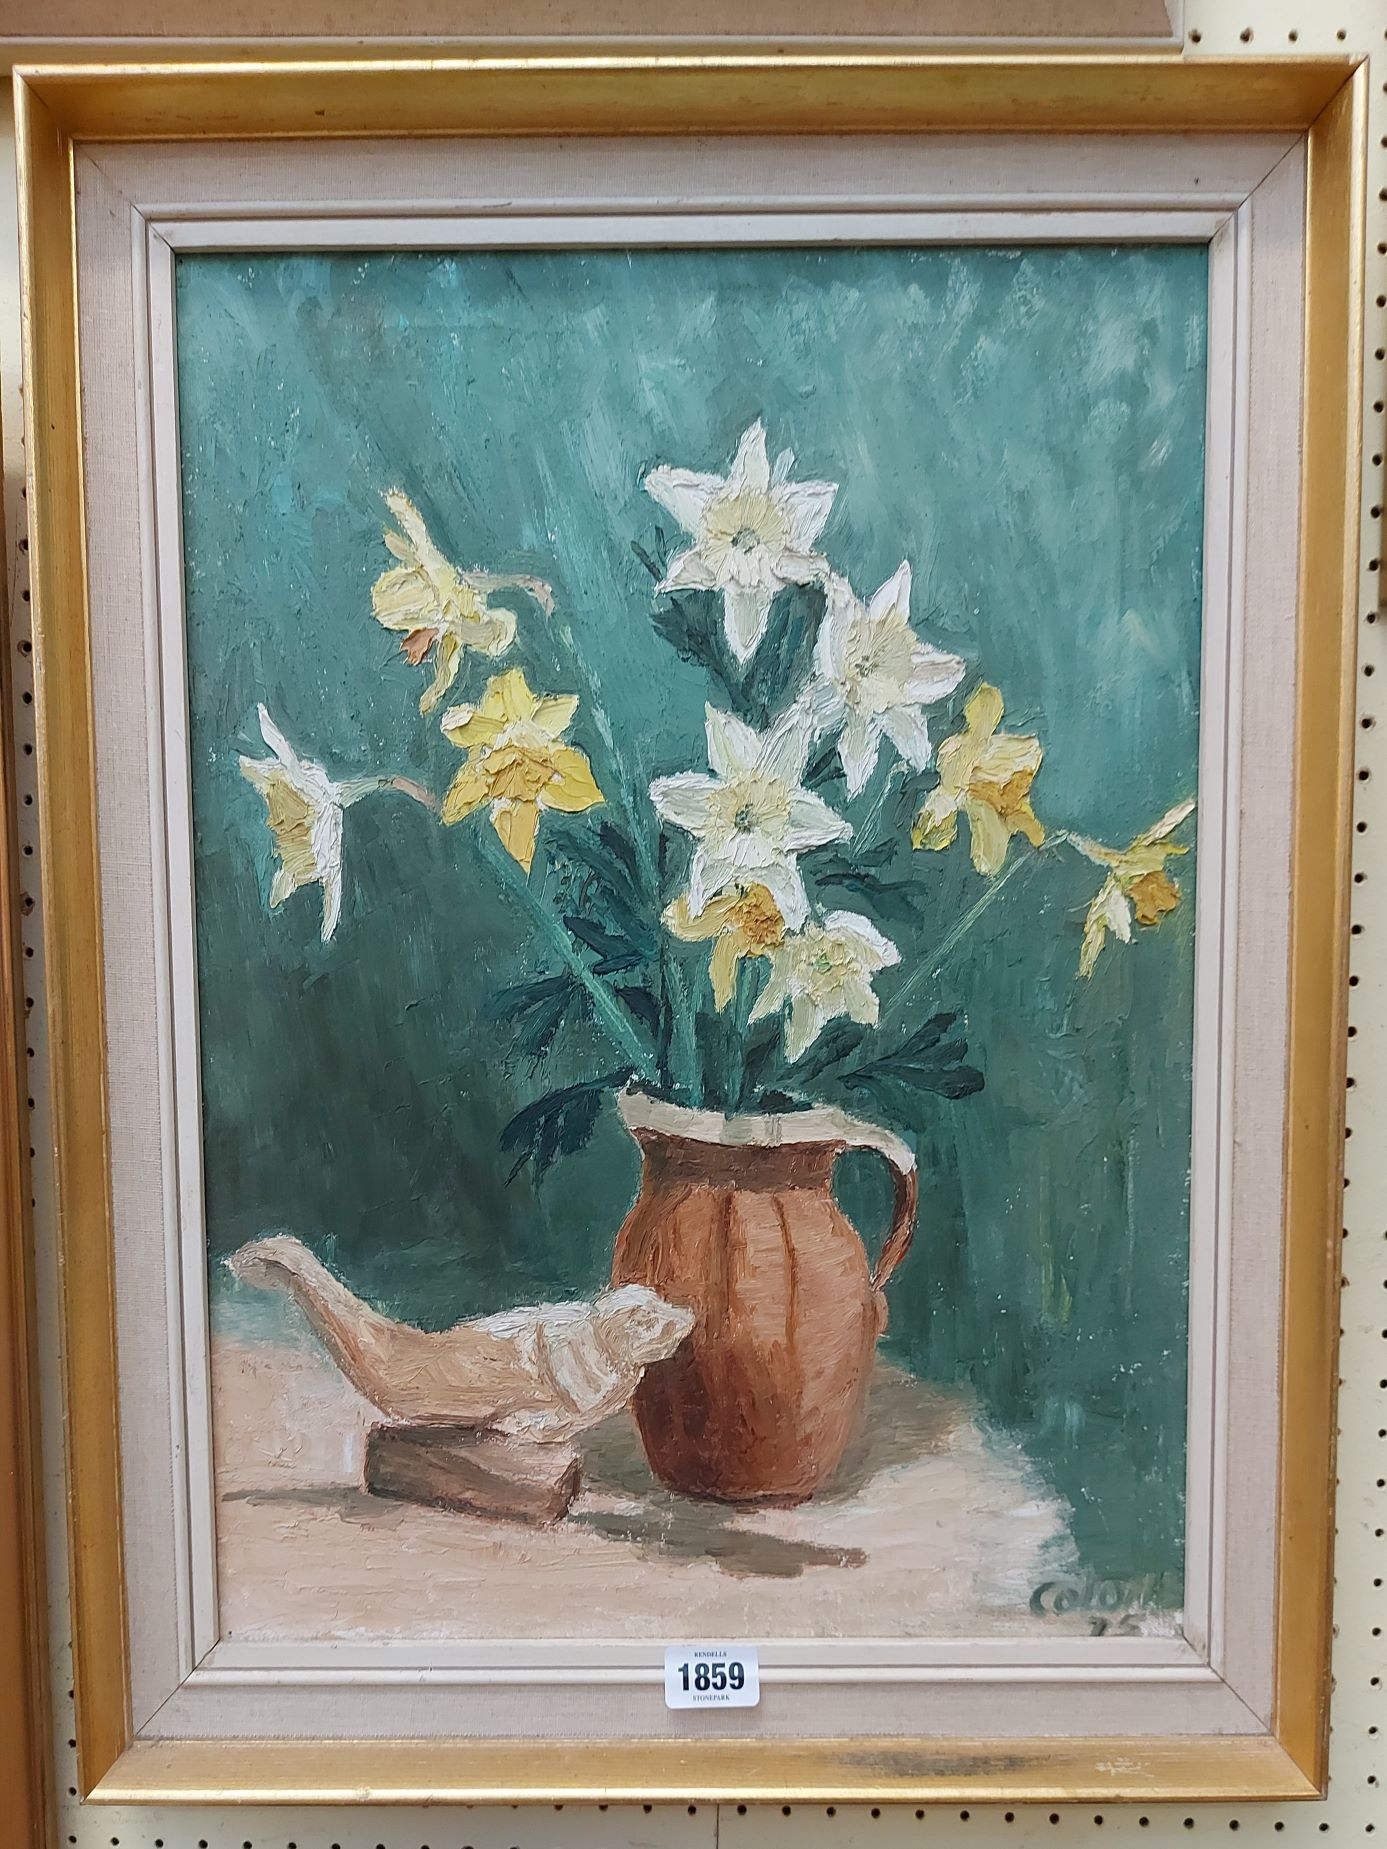 Colum: a vintage gilt and hessian framed oil on canvas still life with daffodils in a jug - signed